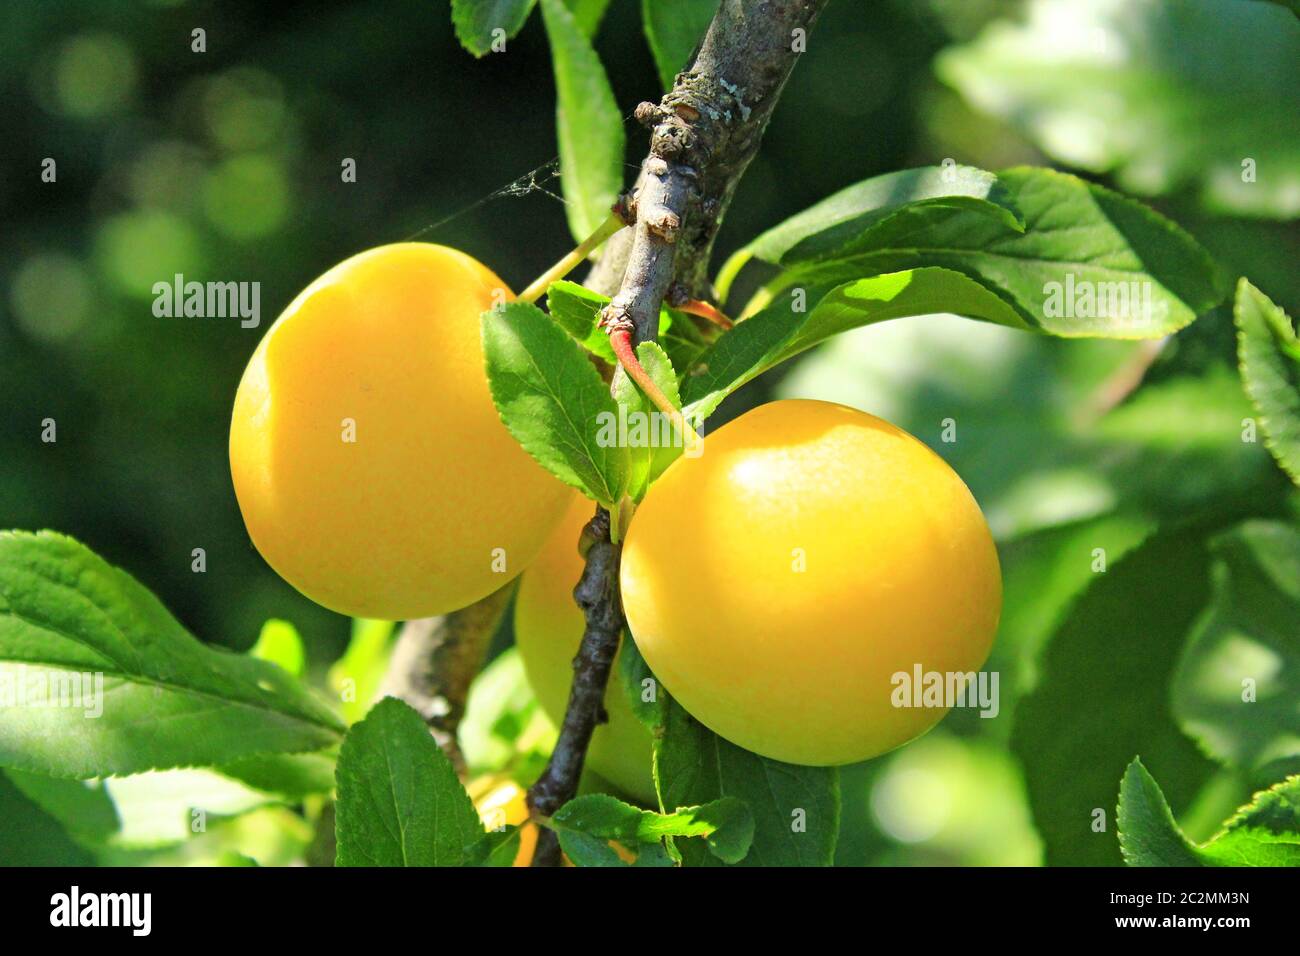 Fruits of cherry-plum on tree. Ripe gifts of nature. Fruits of yellow plum on tree branch in summer Stock Photo